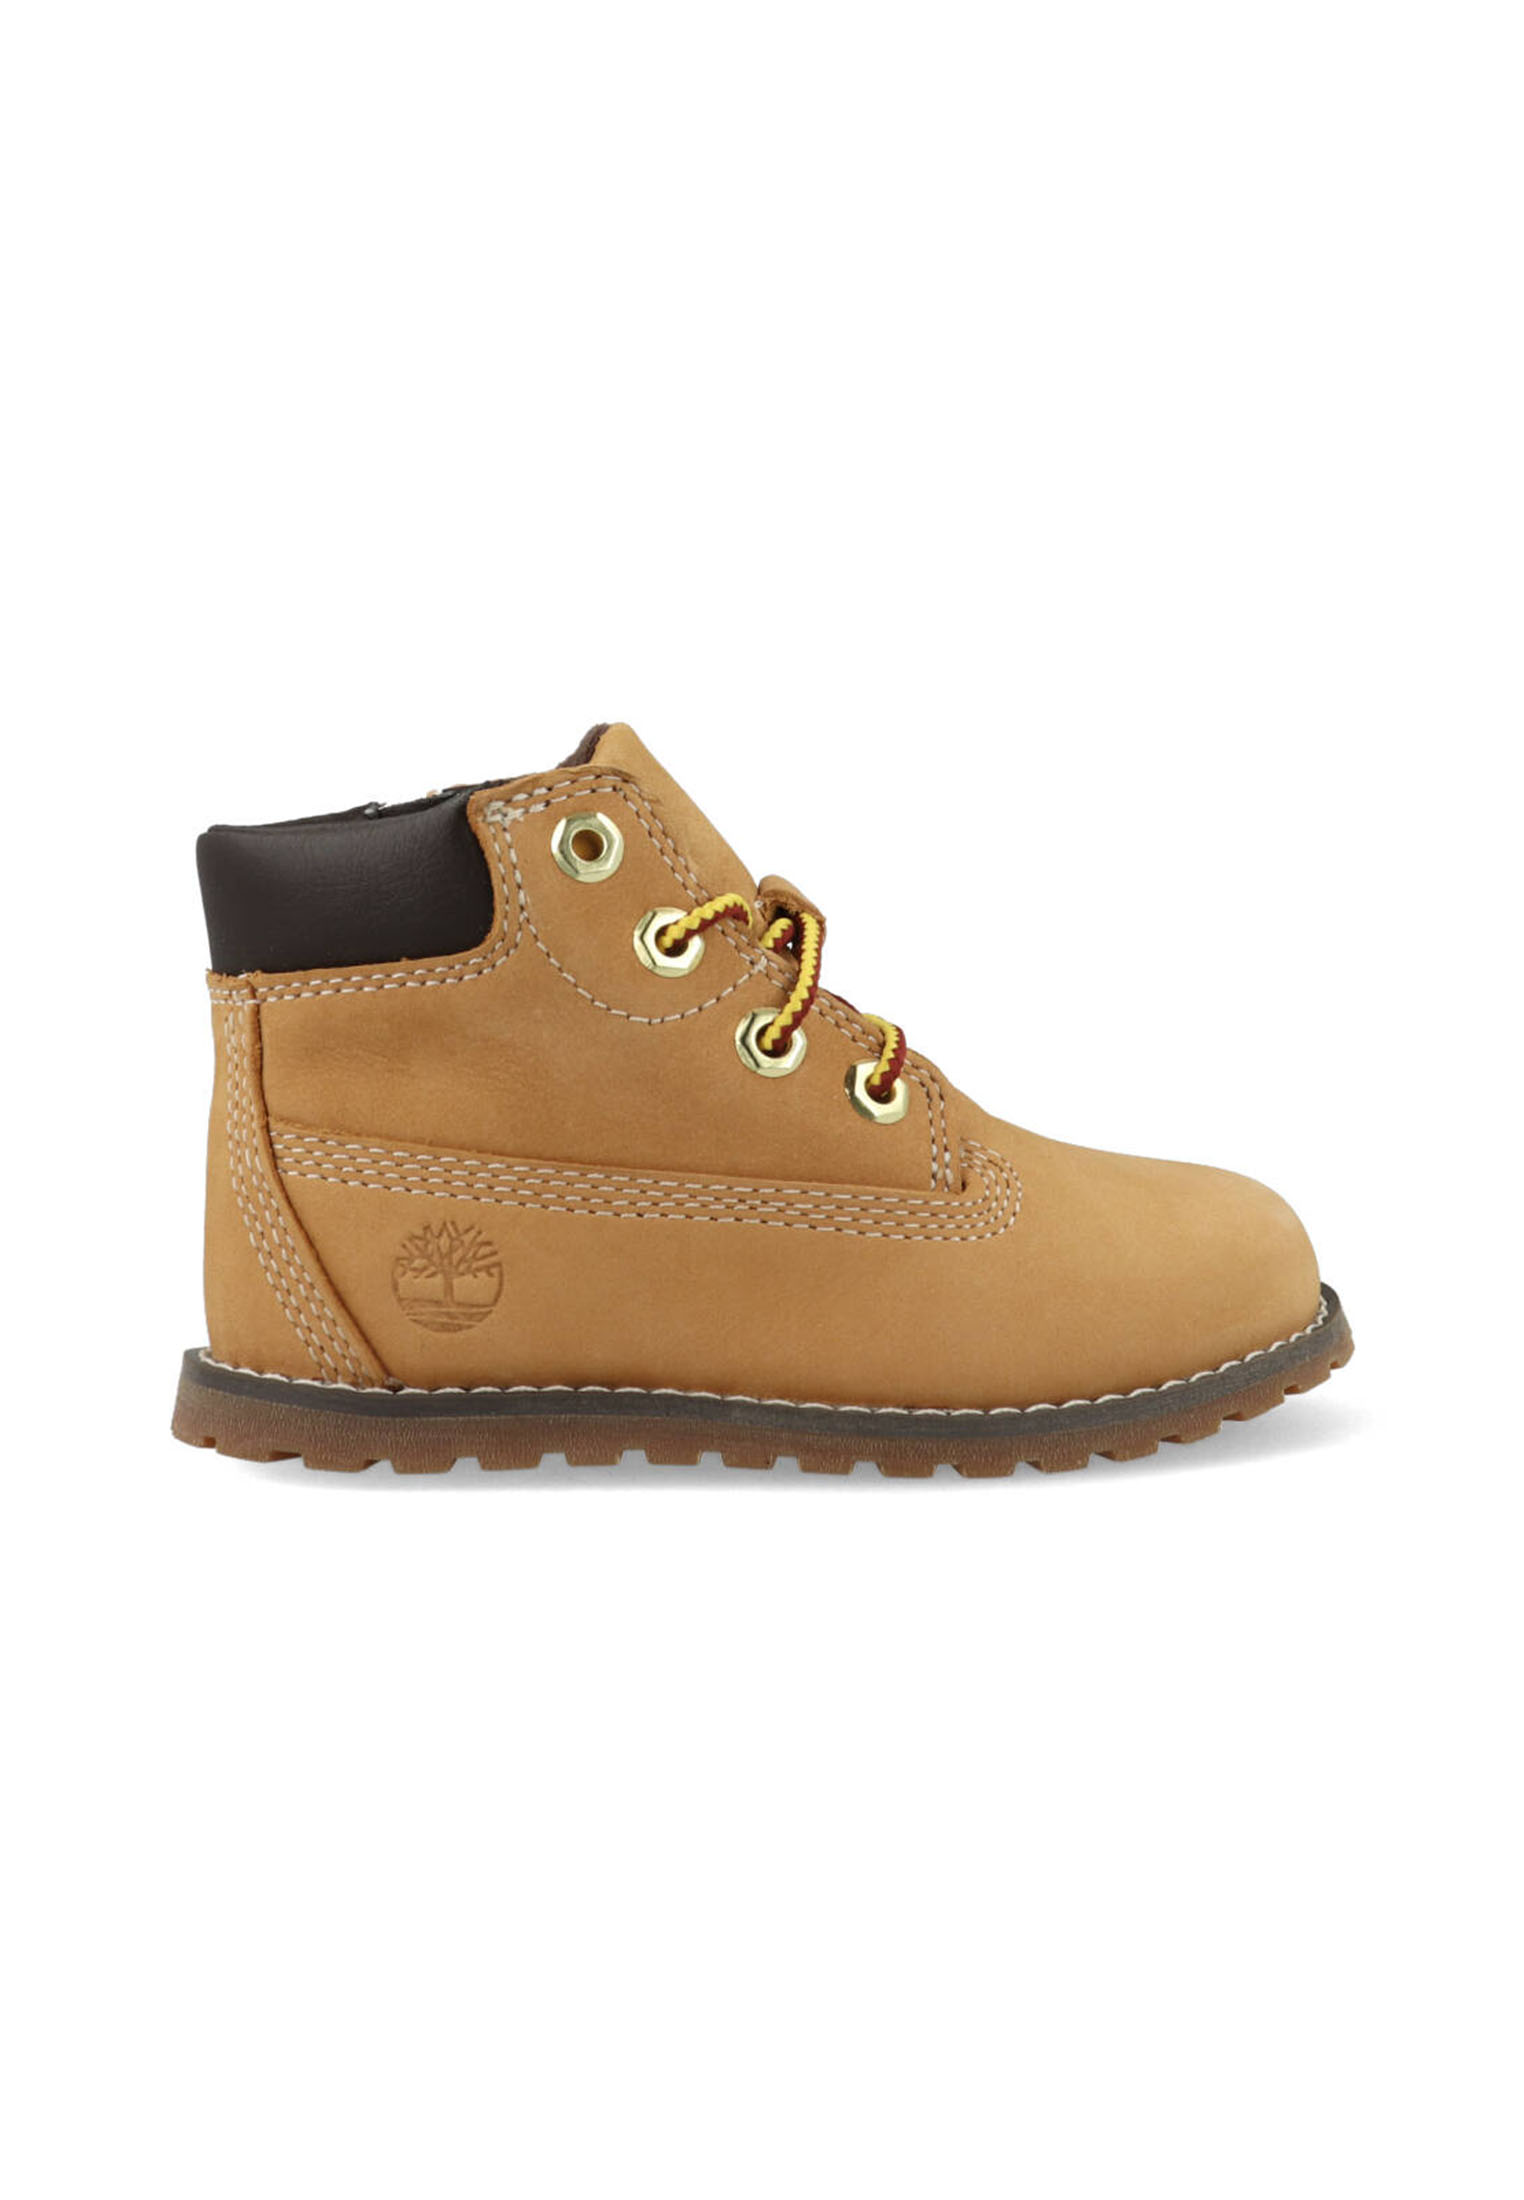 Timberland Pokey Pine 6 inch Boots A125Q Bruin 30 maat 30